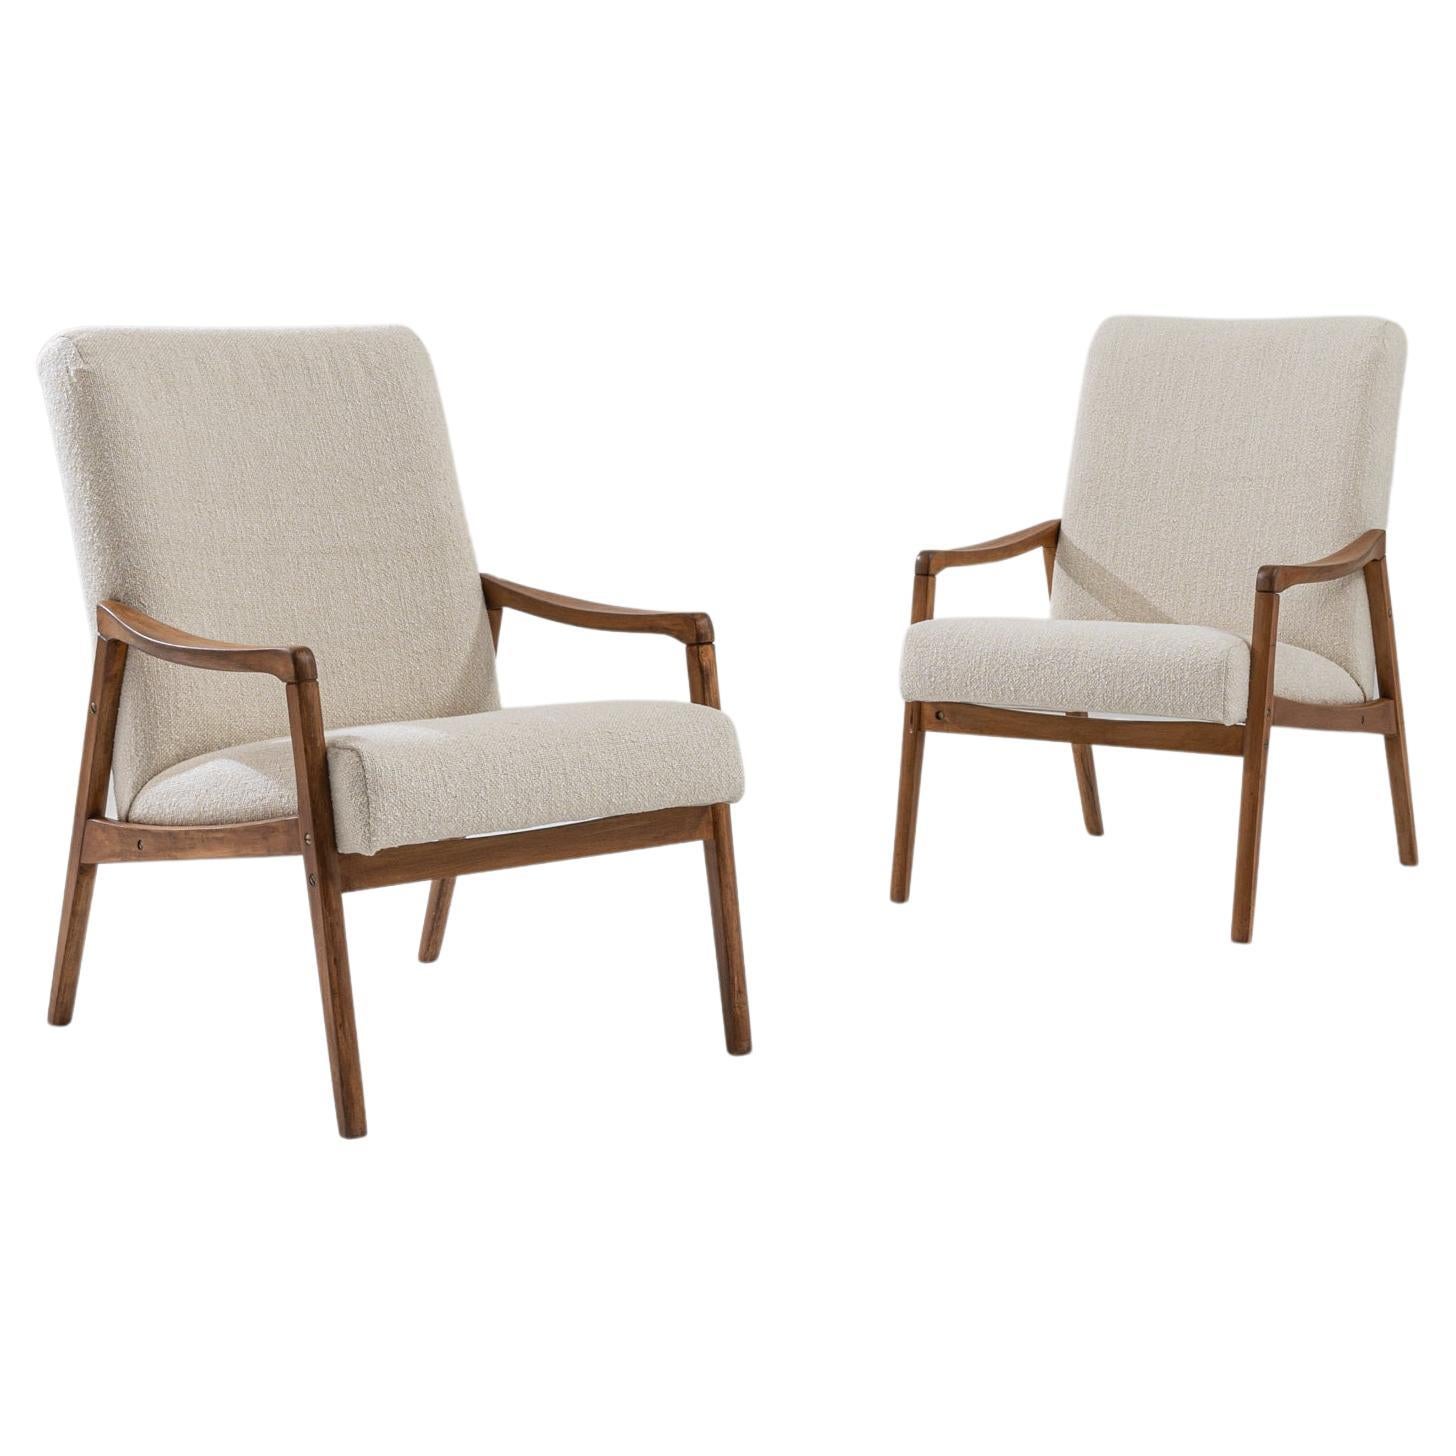 1960s Czechia Pair of Wooden Armchairs For Sale